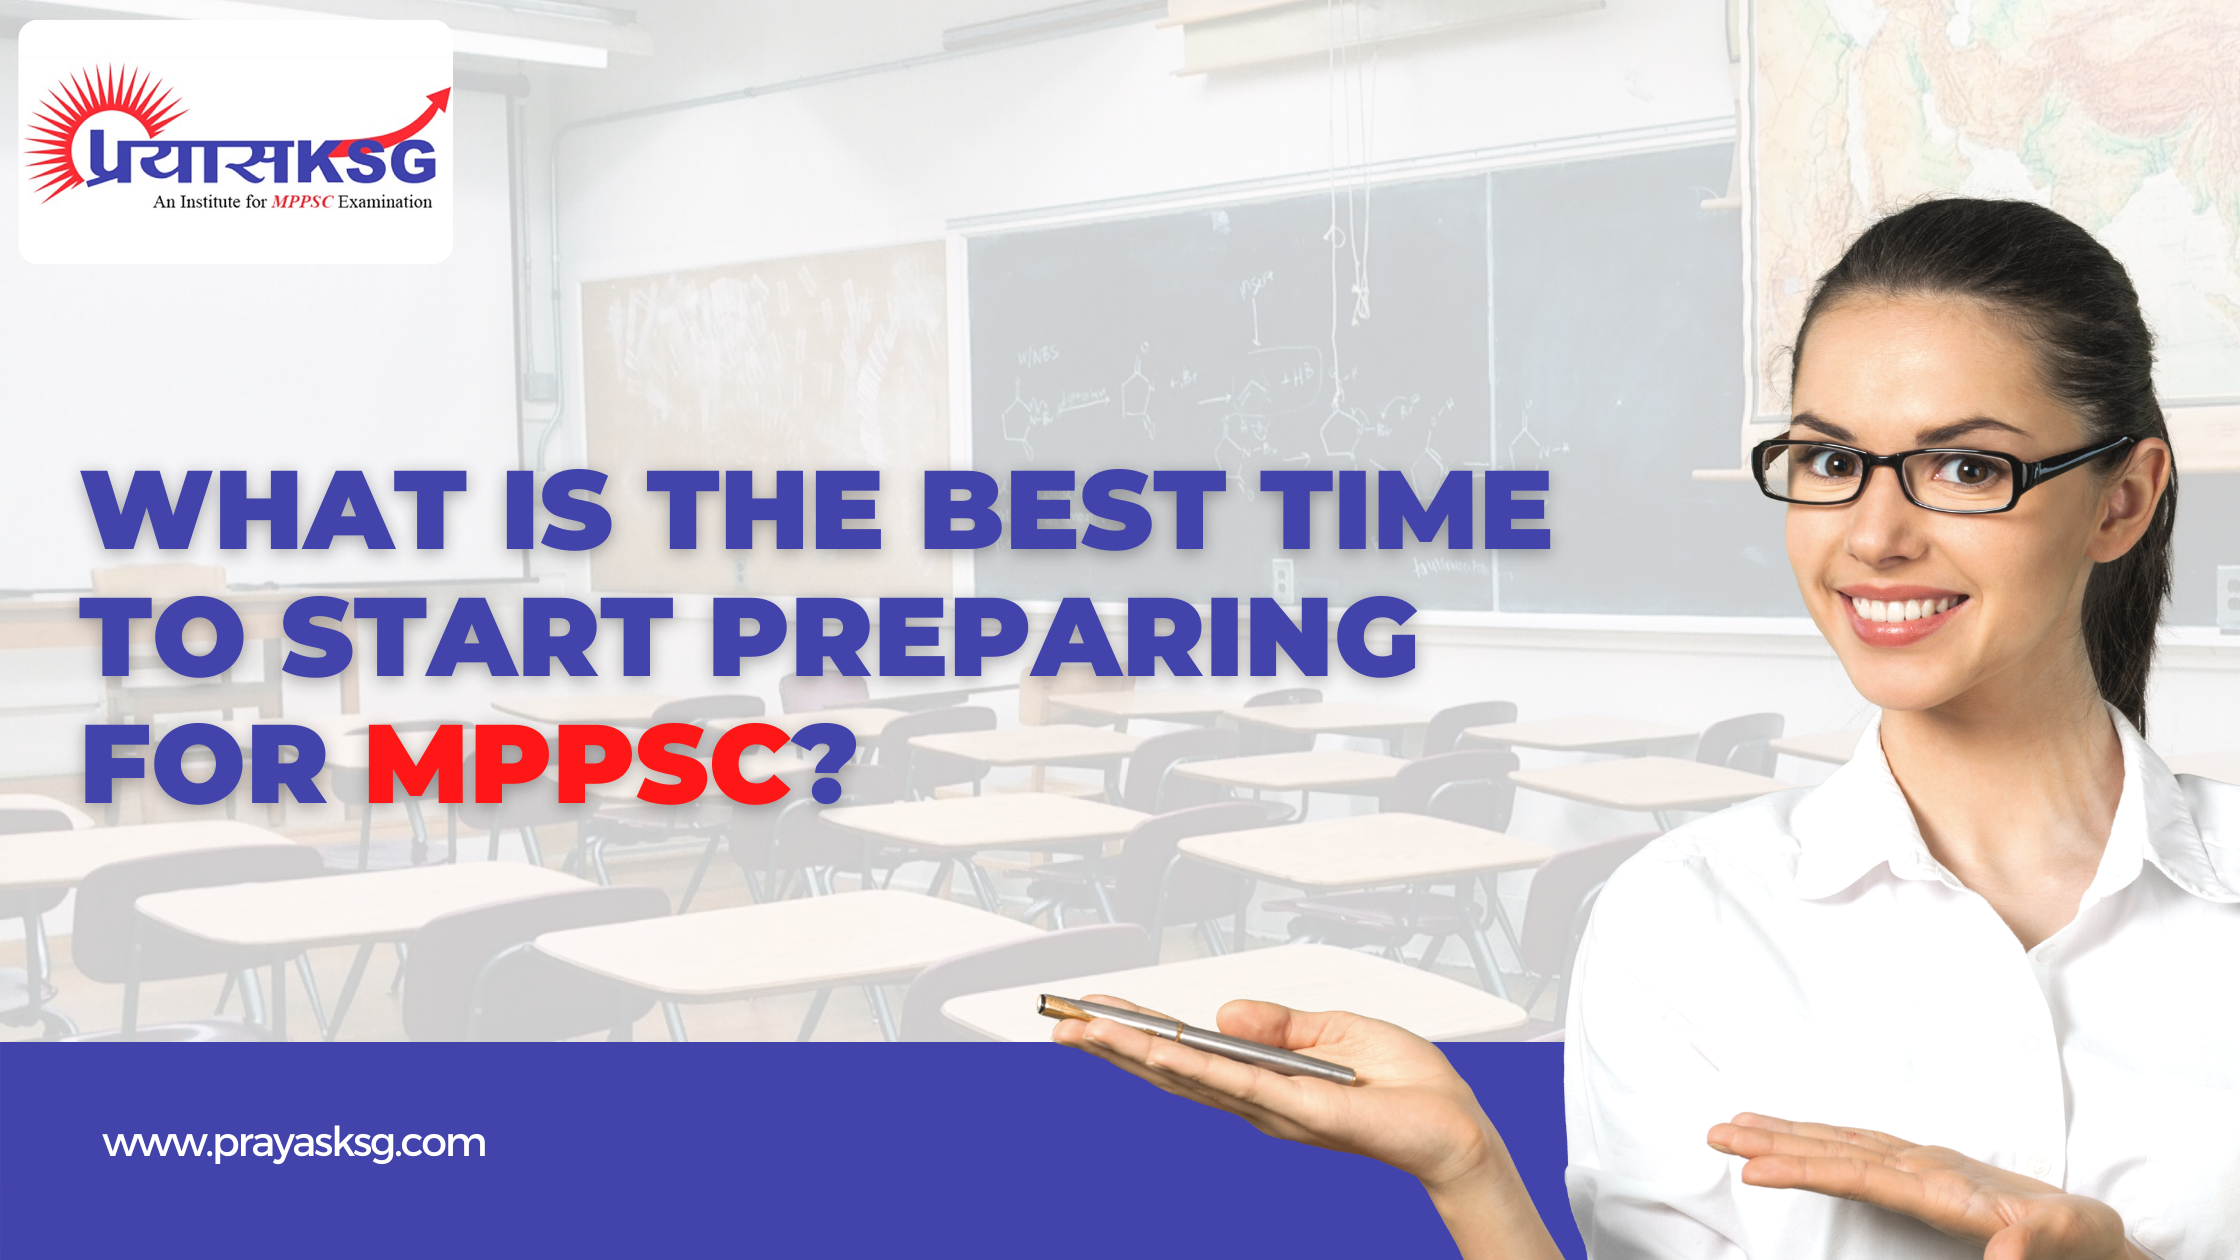 What is the best time to start preparing for MPPSC?